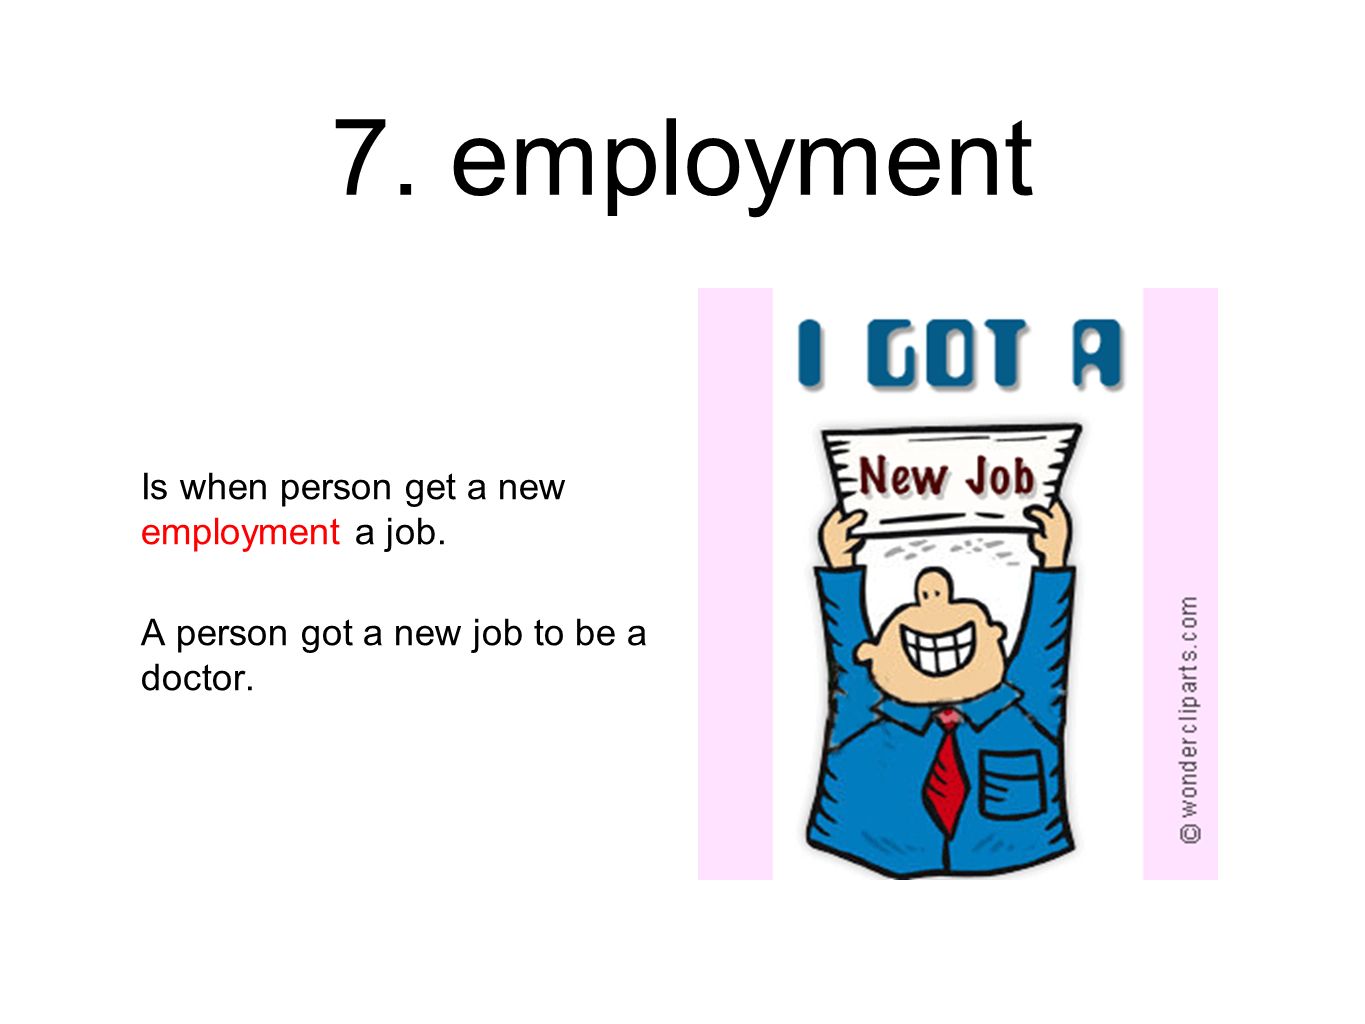 7. employment Is when person get a new employment a job. A person got a new job to be a doctor.